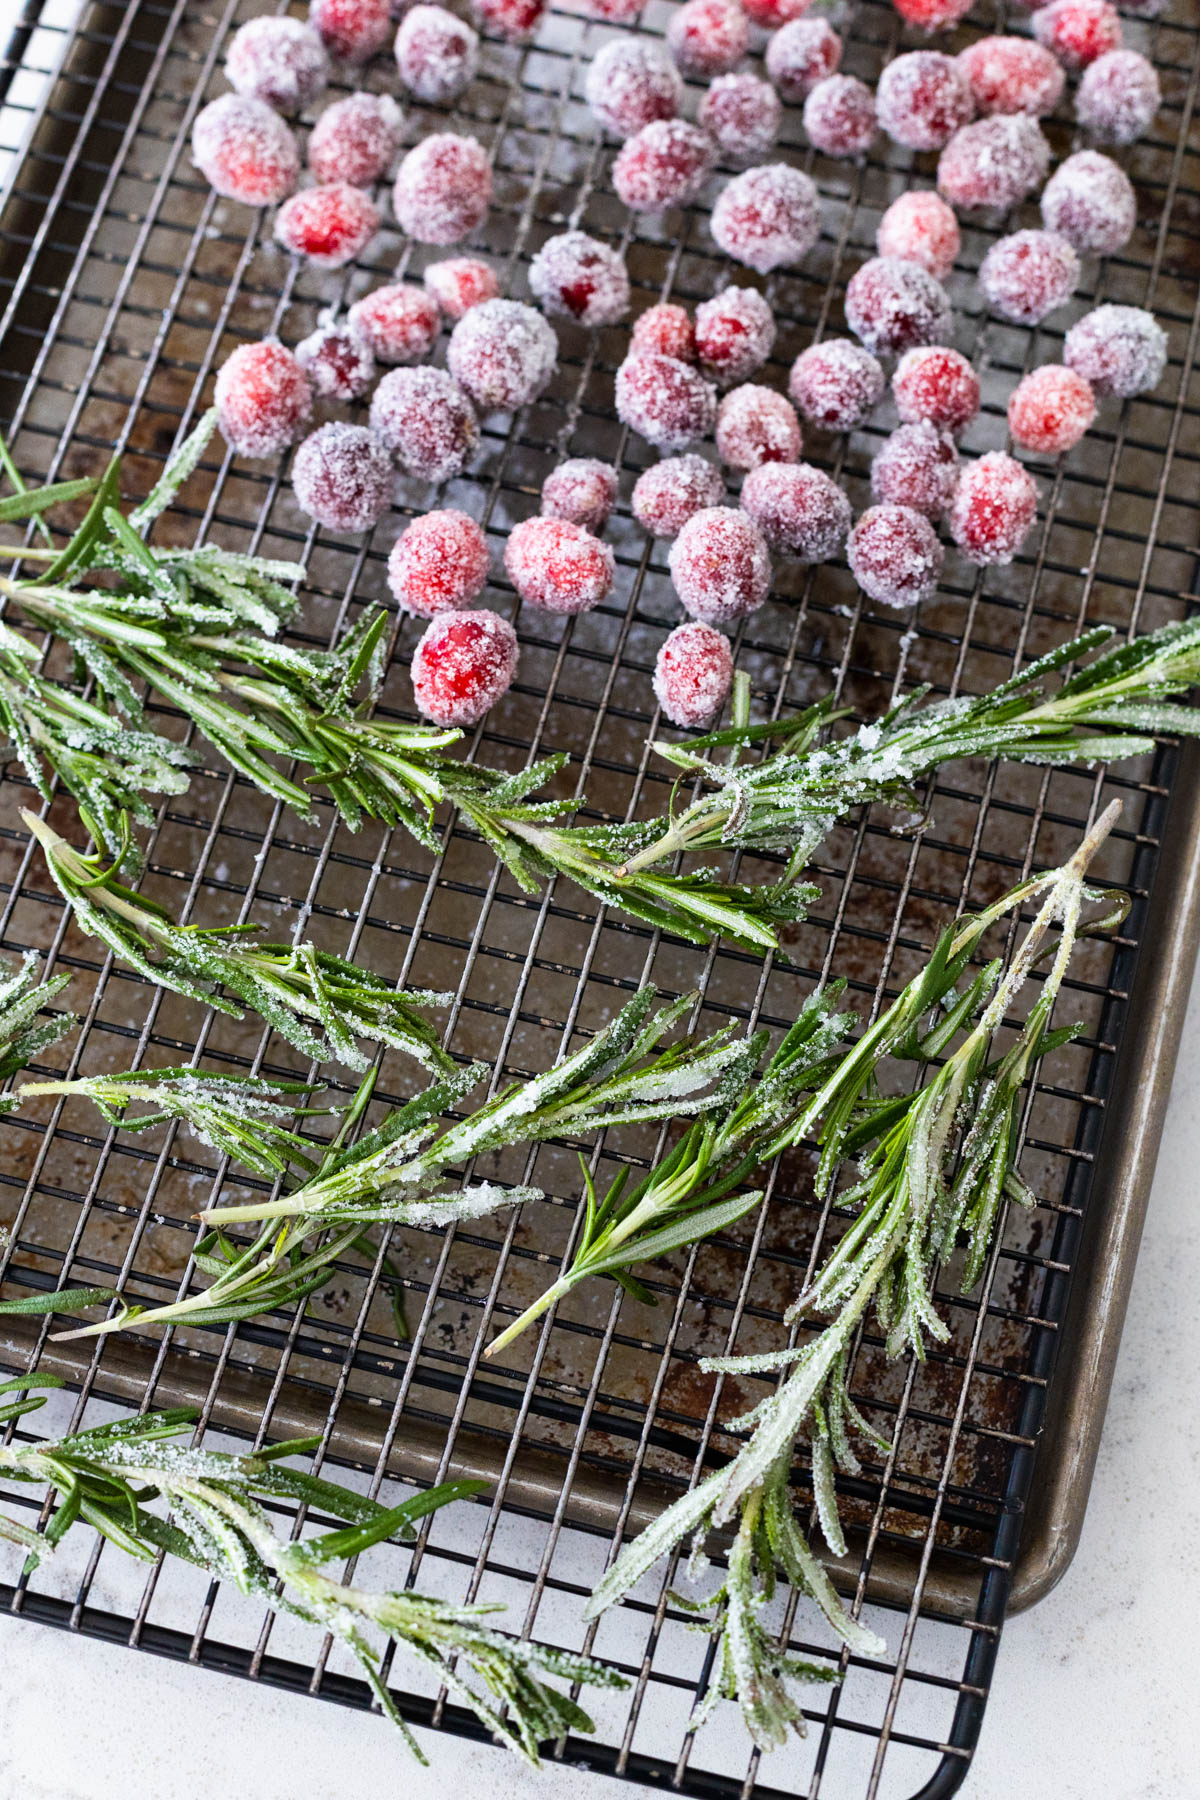 The sugared rosemary and cranberries are drying on a wire rack.